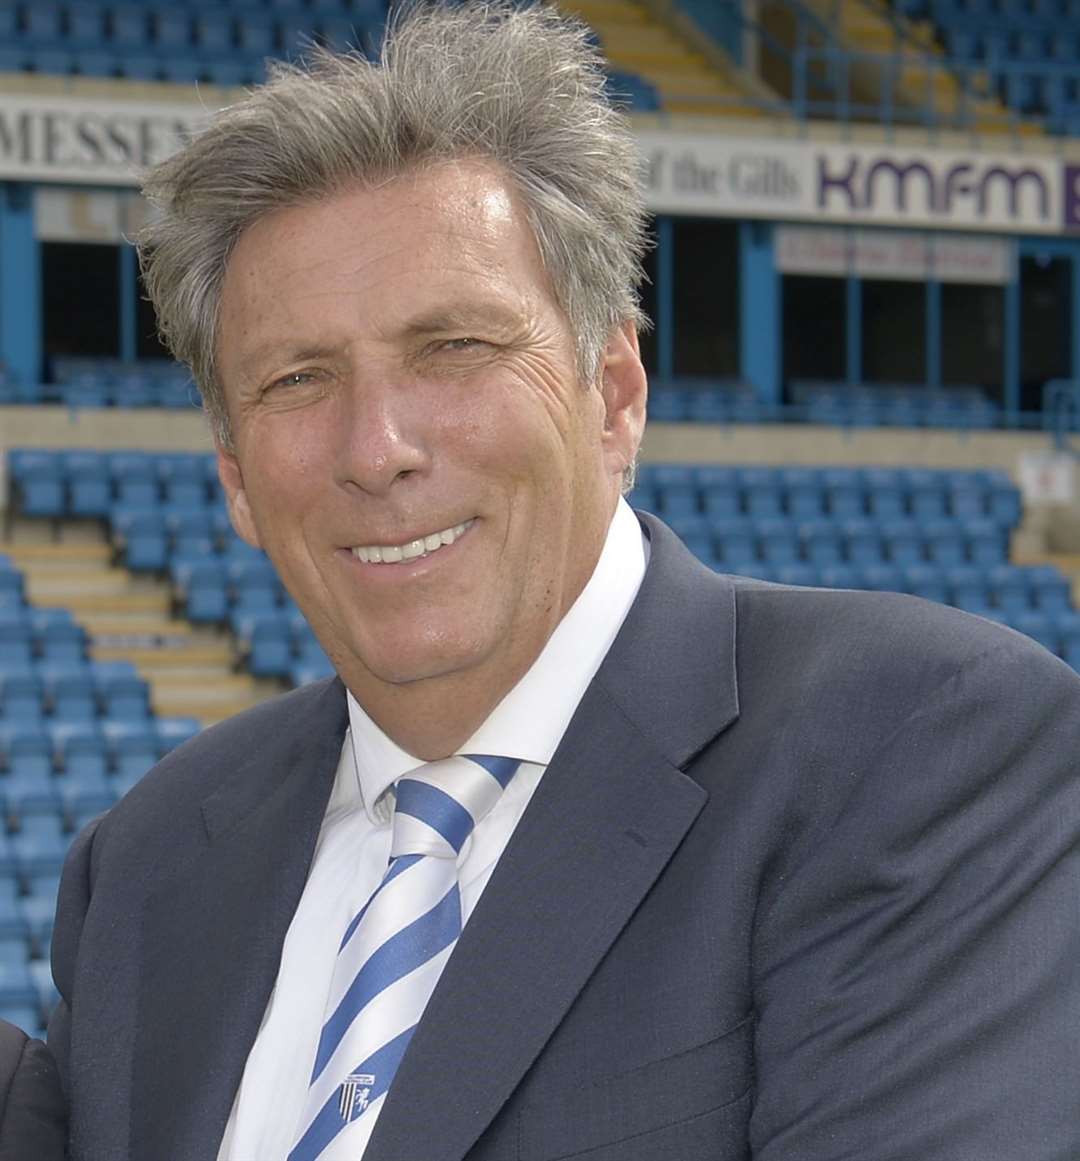 Former Gills' vice chairman Michael Anderson